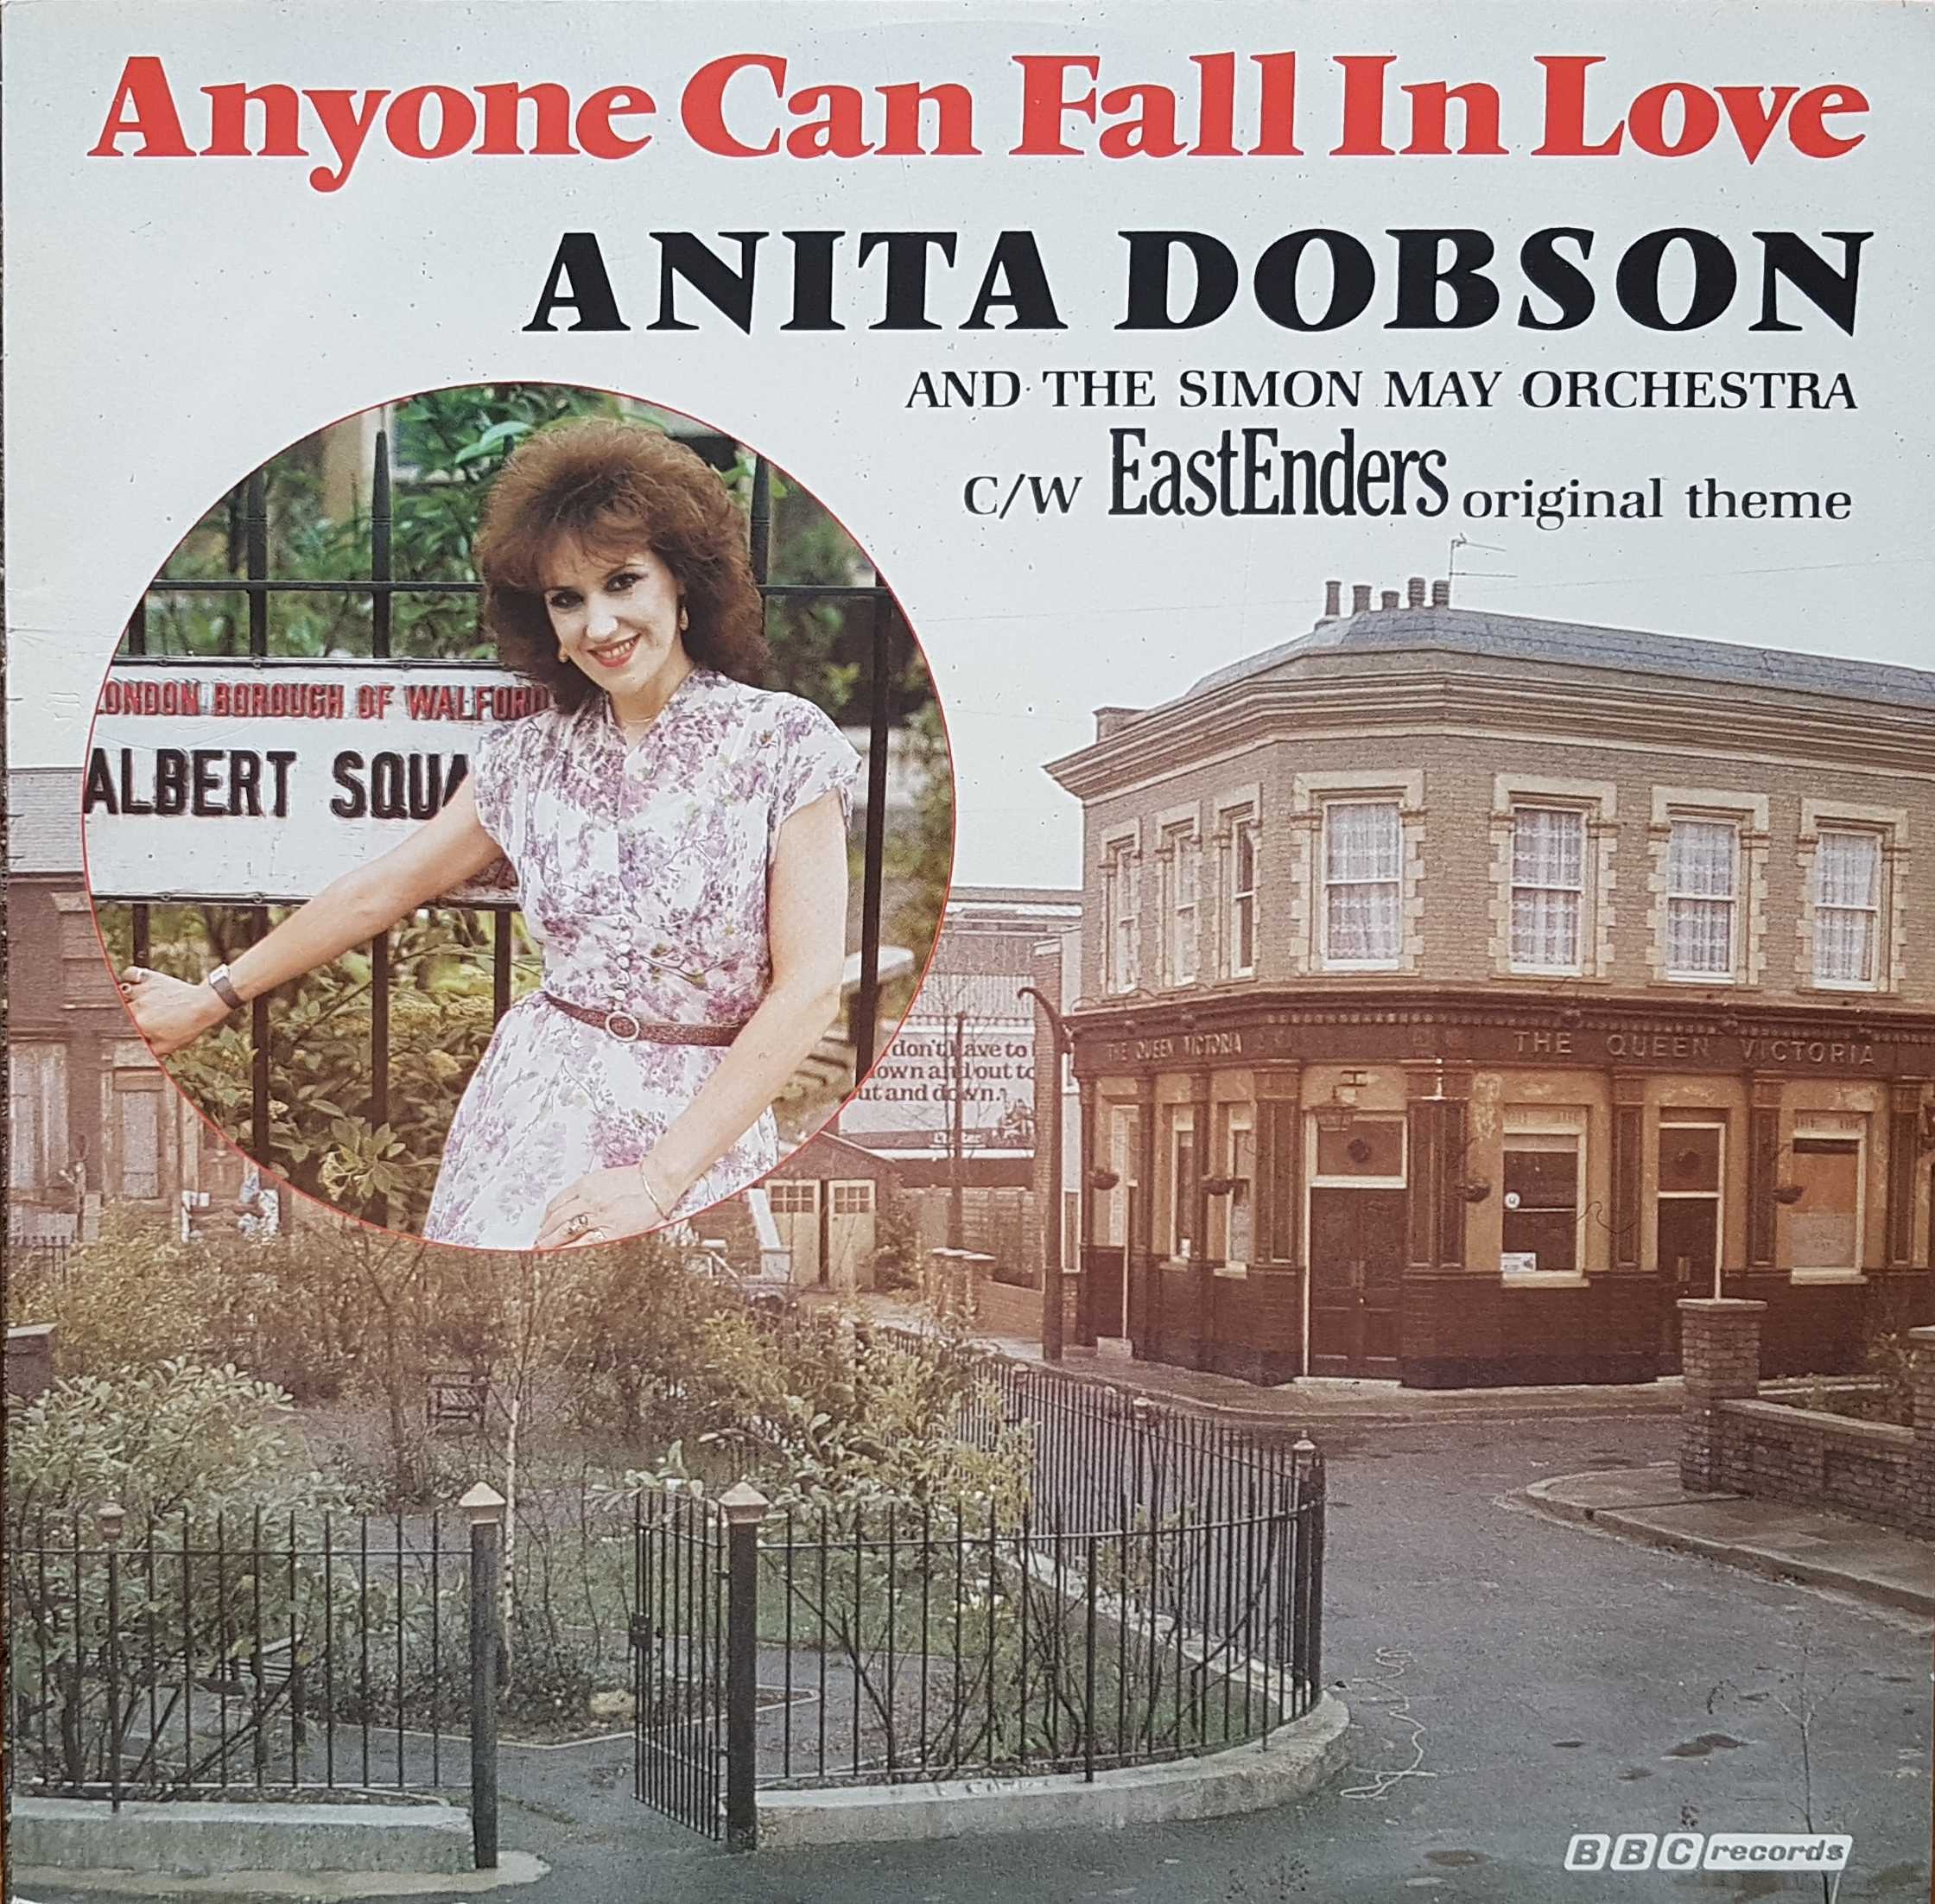 Picture of 12 RSL 191 Anyone can fall in love (EastEnders) 12 inch by artist Simon May / Leslie Osborne / Don Black from the BBC records and Tapes library